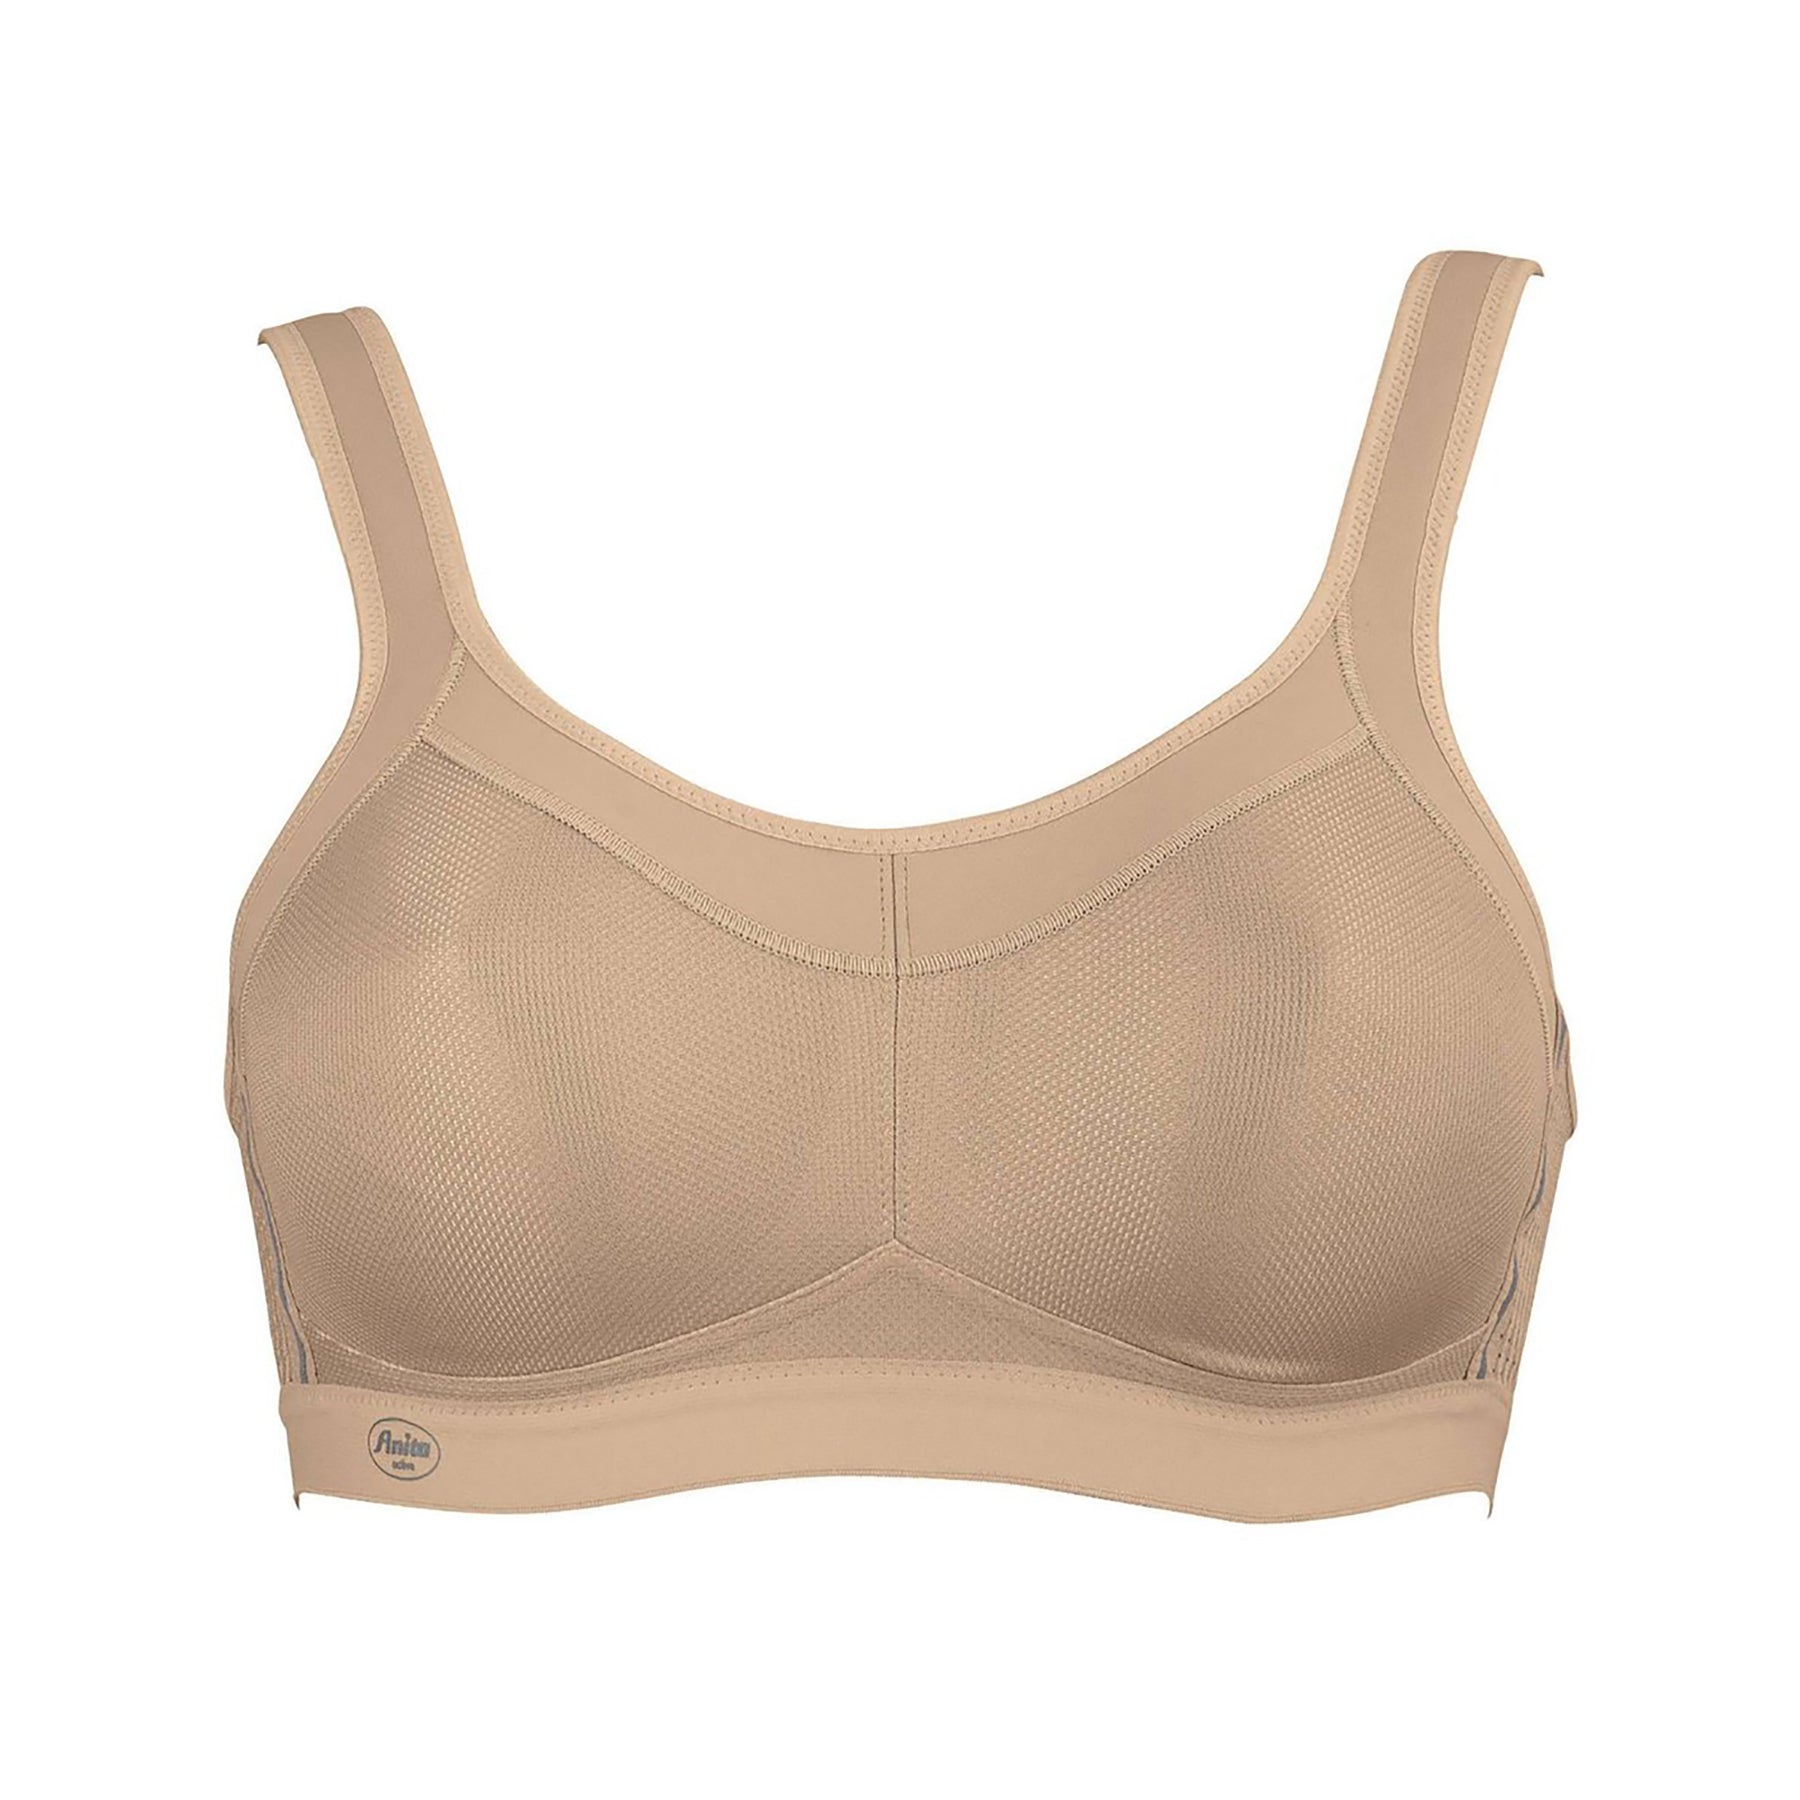 Sports meets Style – Bestselling Anita Active Extreme Control